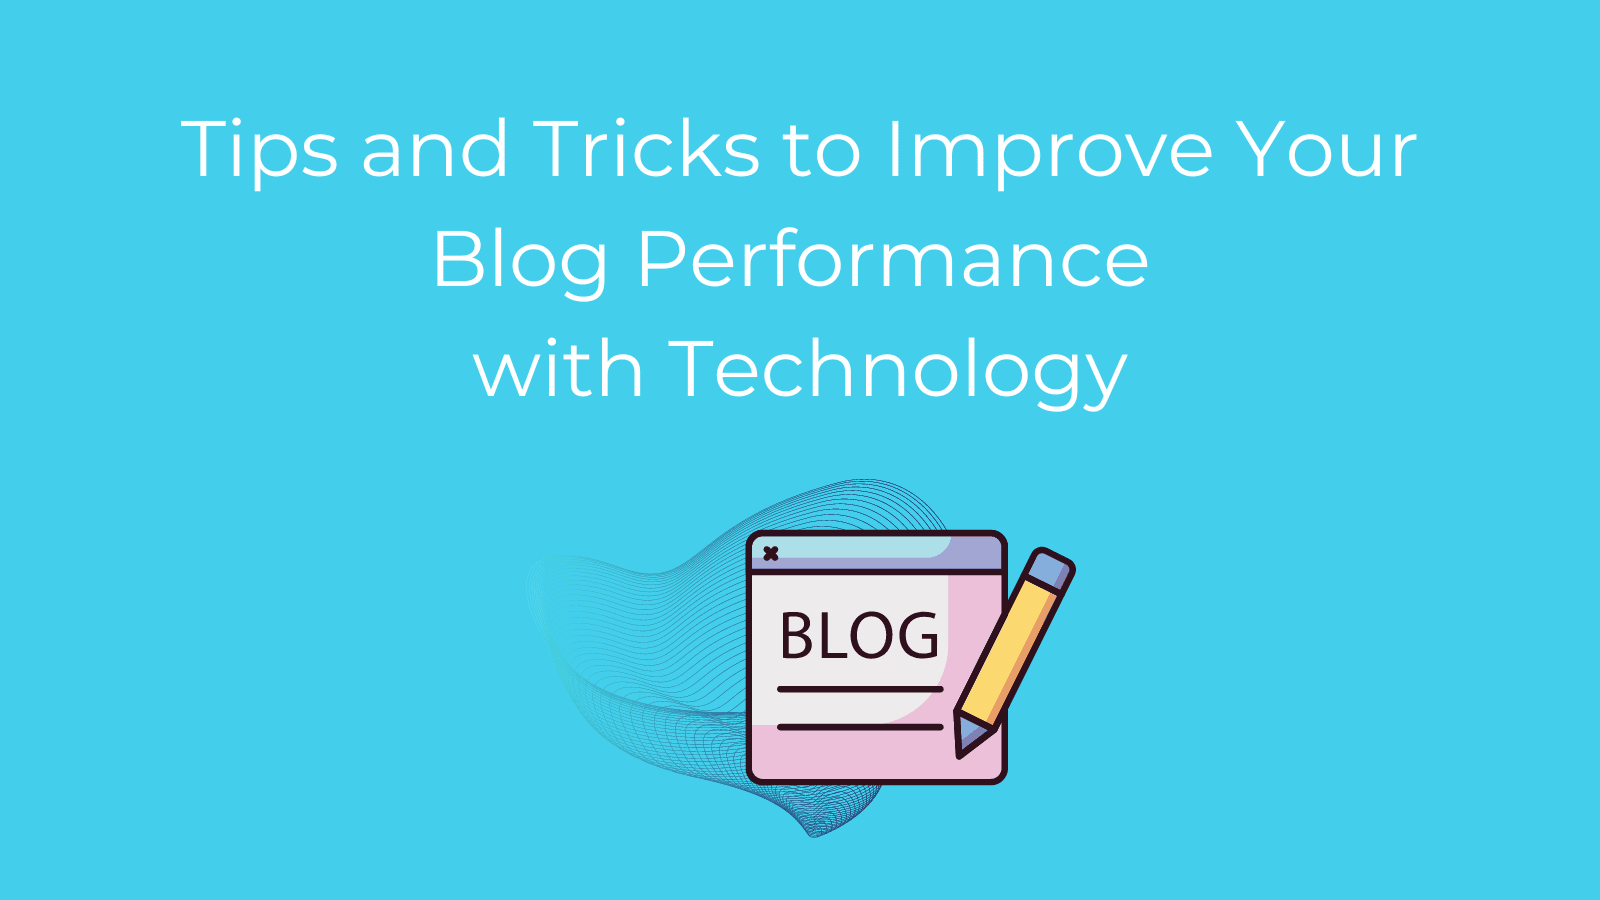 Tips and Tricks to Improve Your Blog Performance with Technology